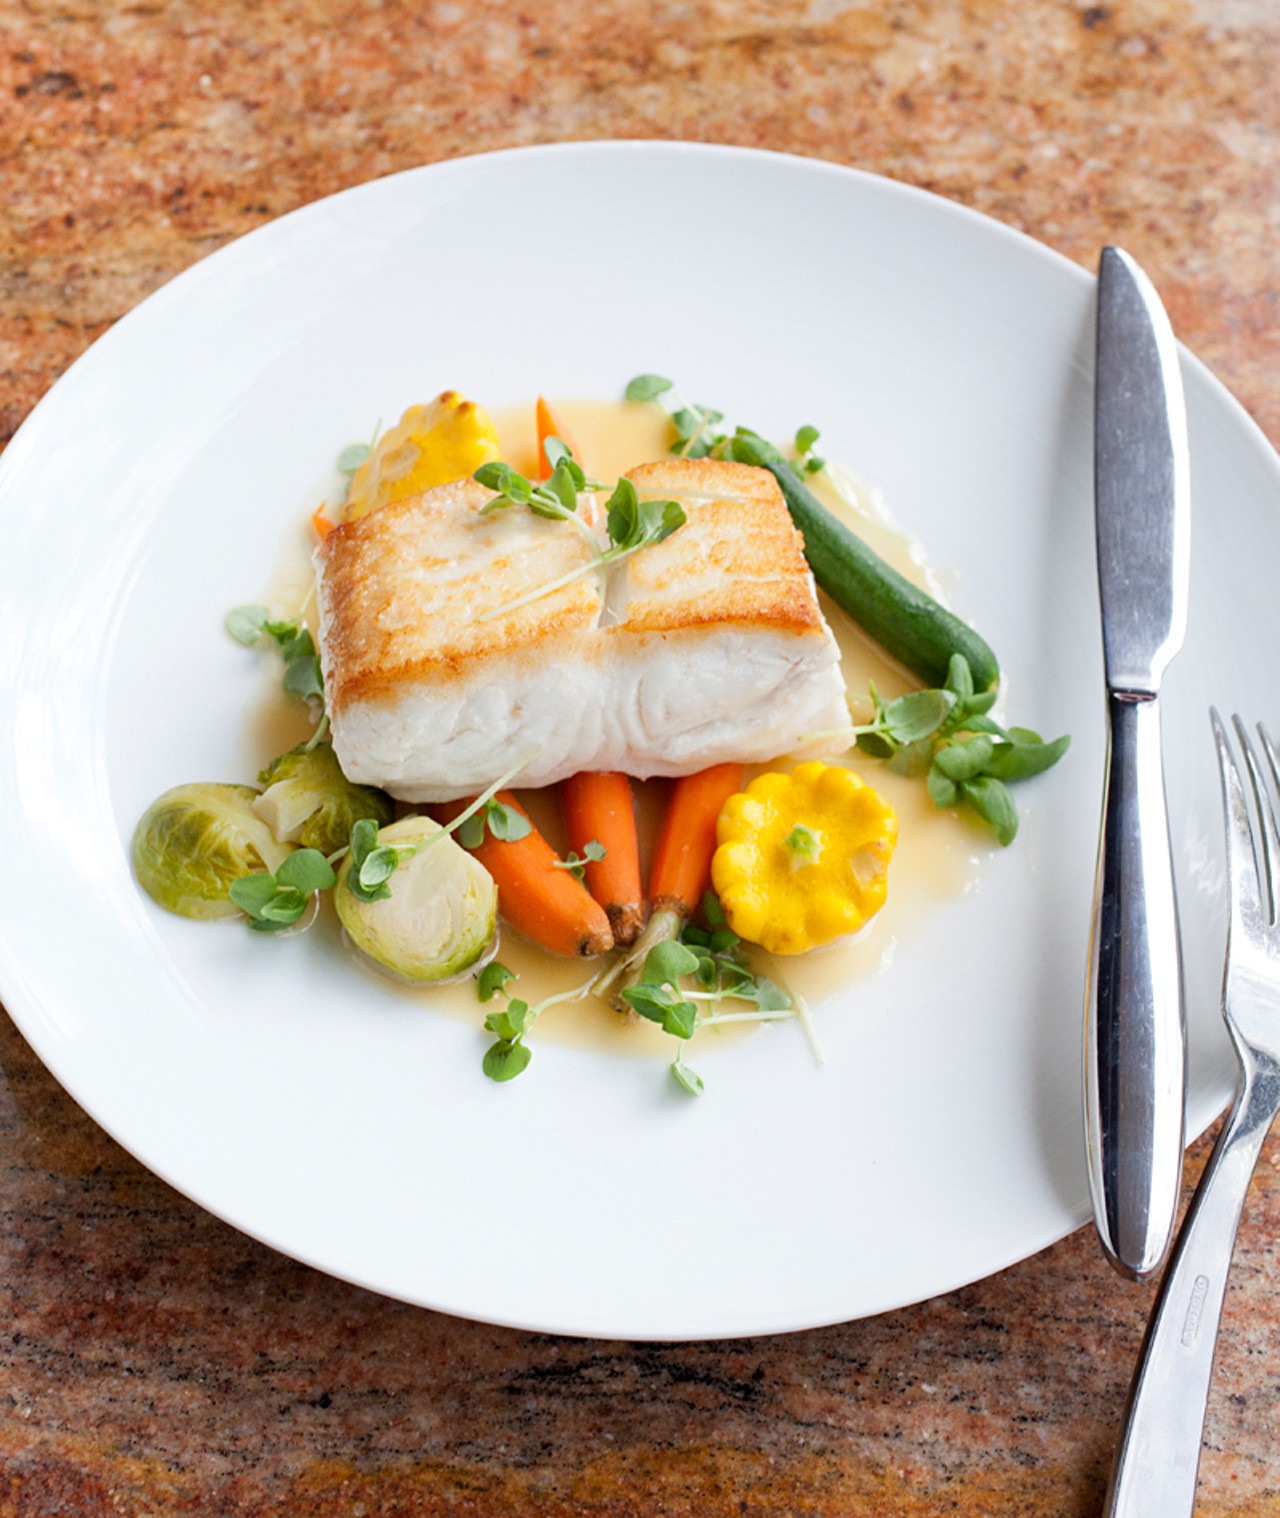 The halibut, braised in white wine with baby vegetables.